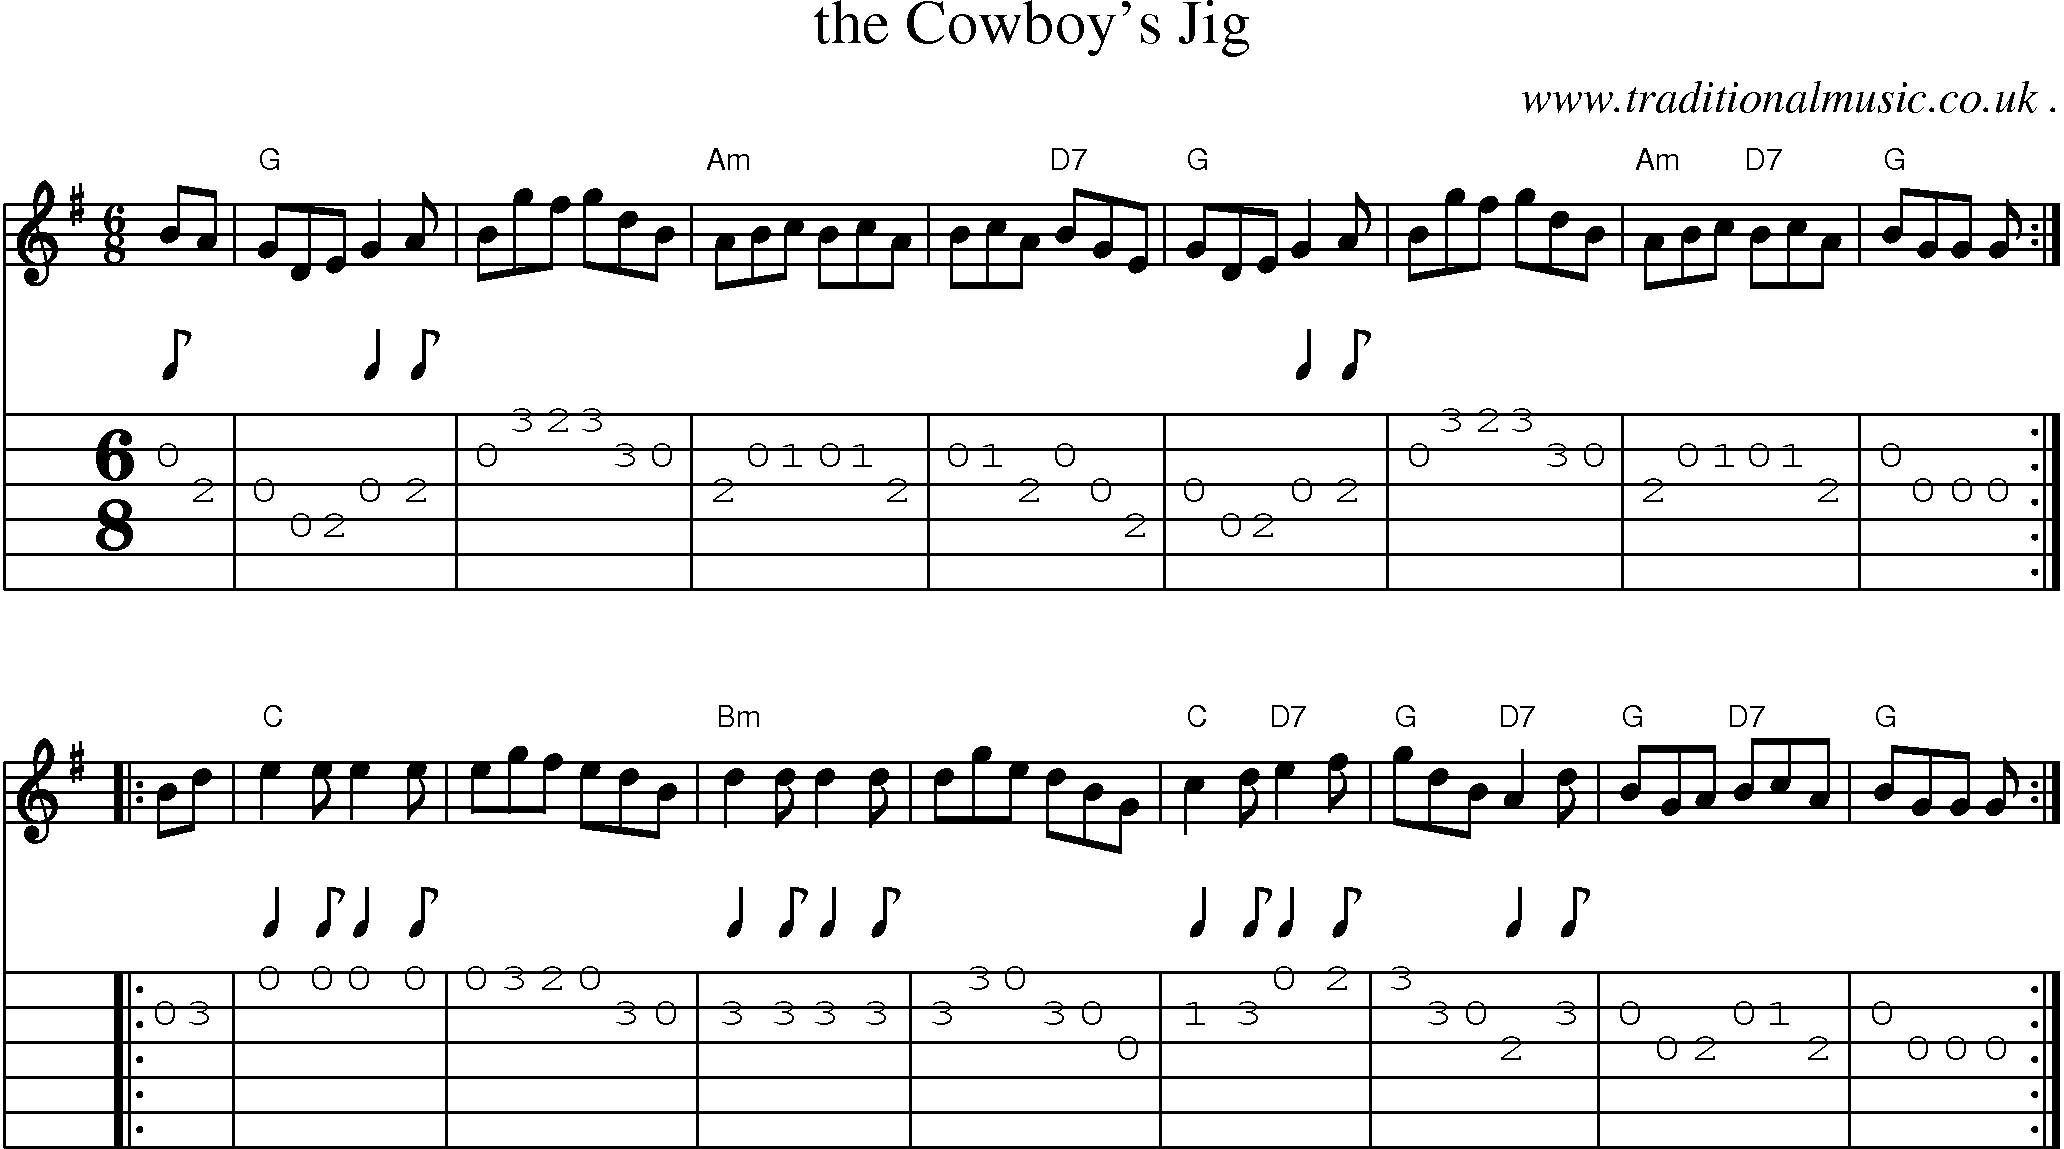 Sheet-music  score, Chords and Guitar Tabs for The Cowboys Jig